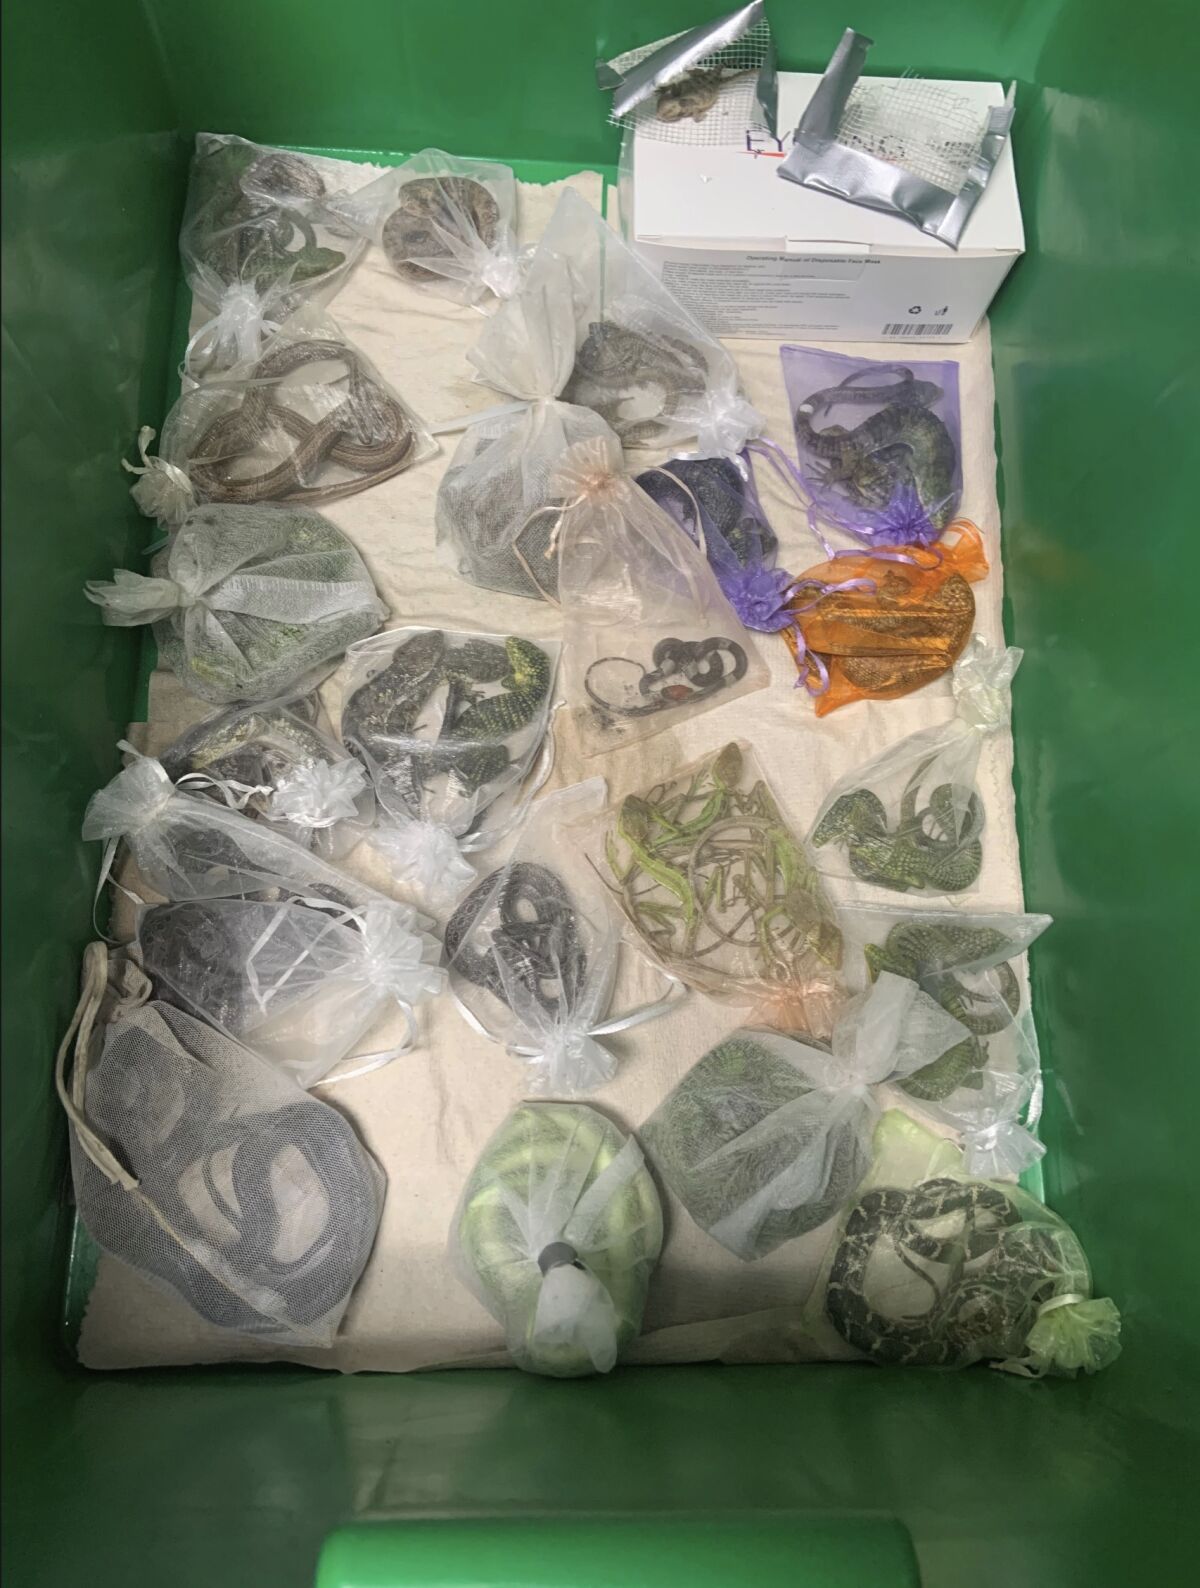 Several snakes and lizards in transparent bags inside a crate